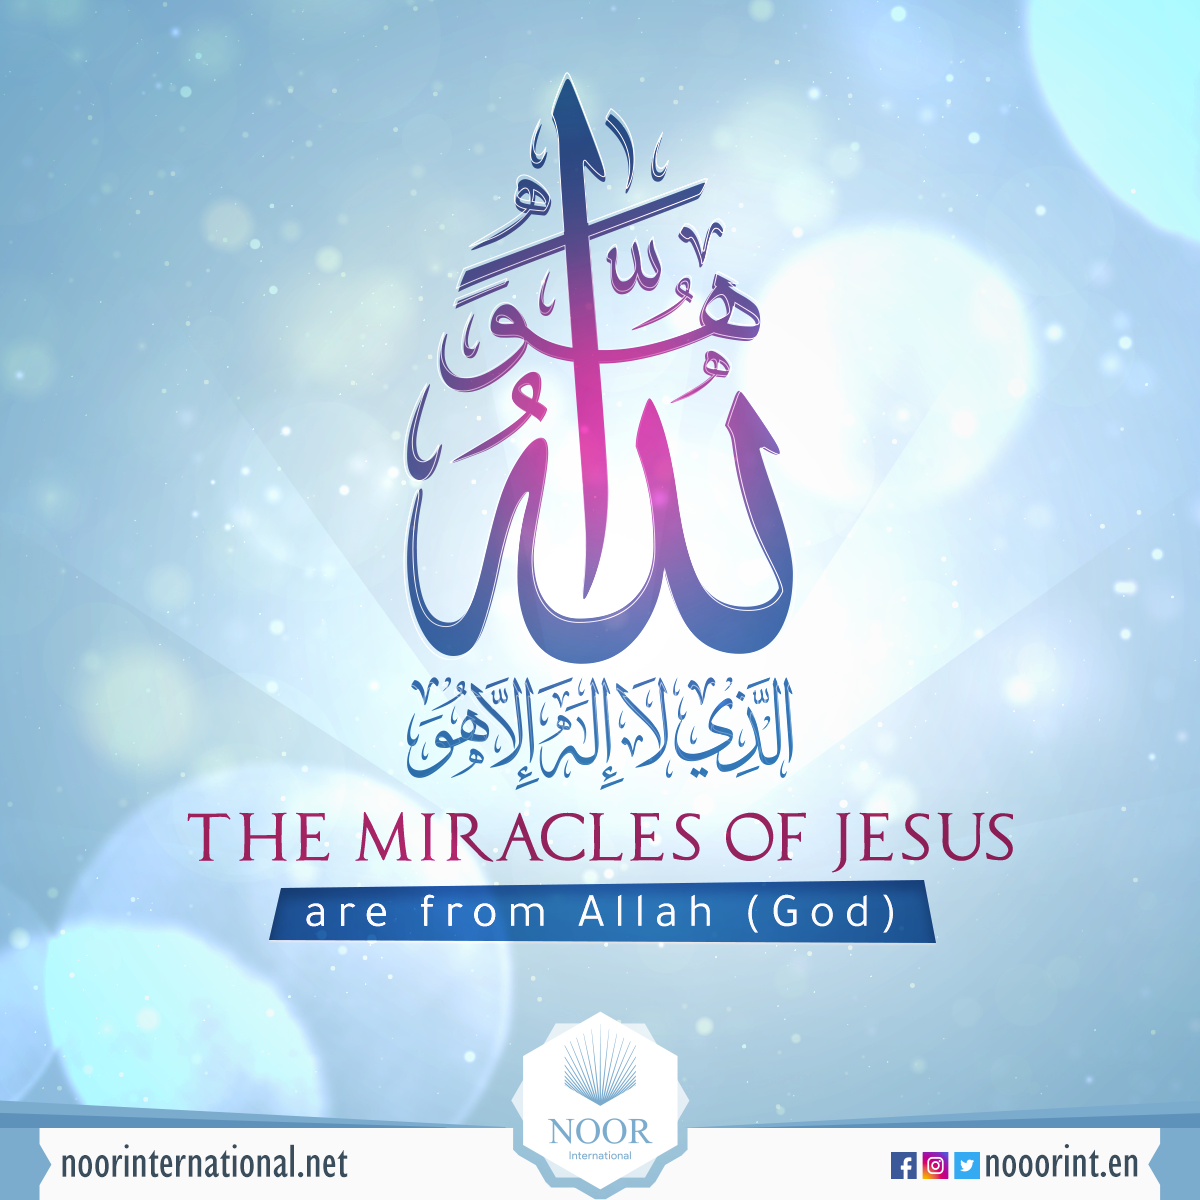 The Miracles of Christ are from Allah